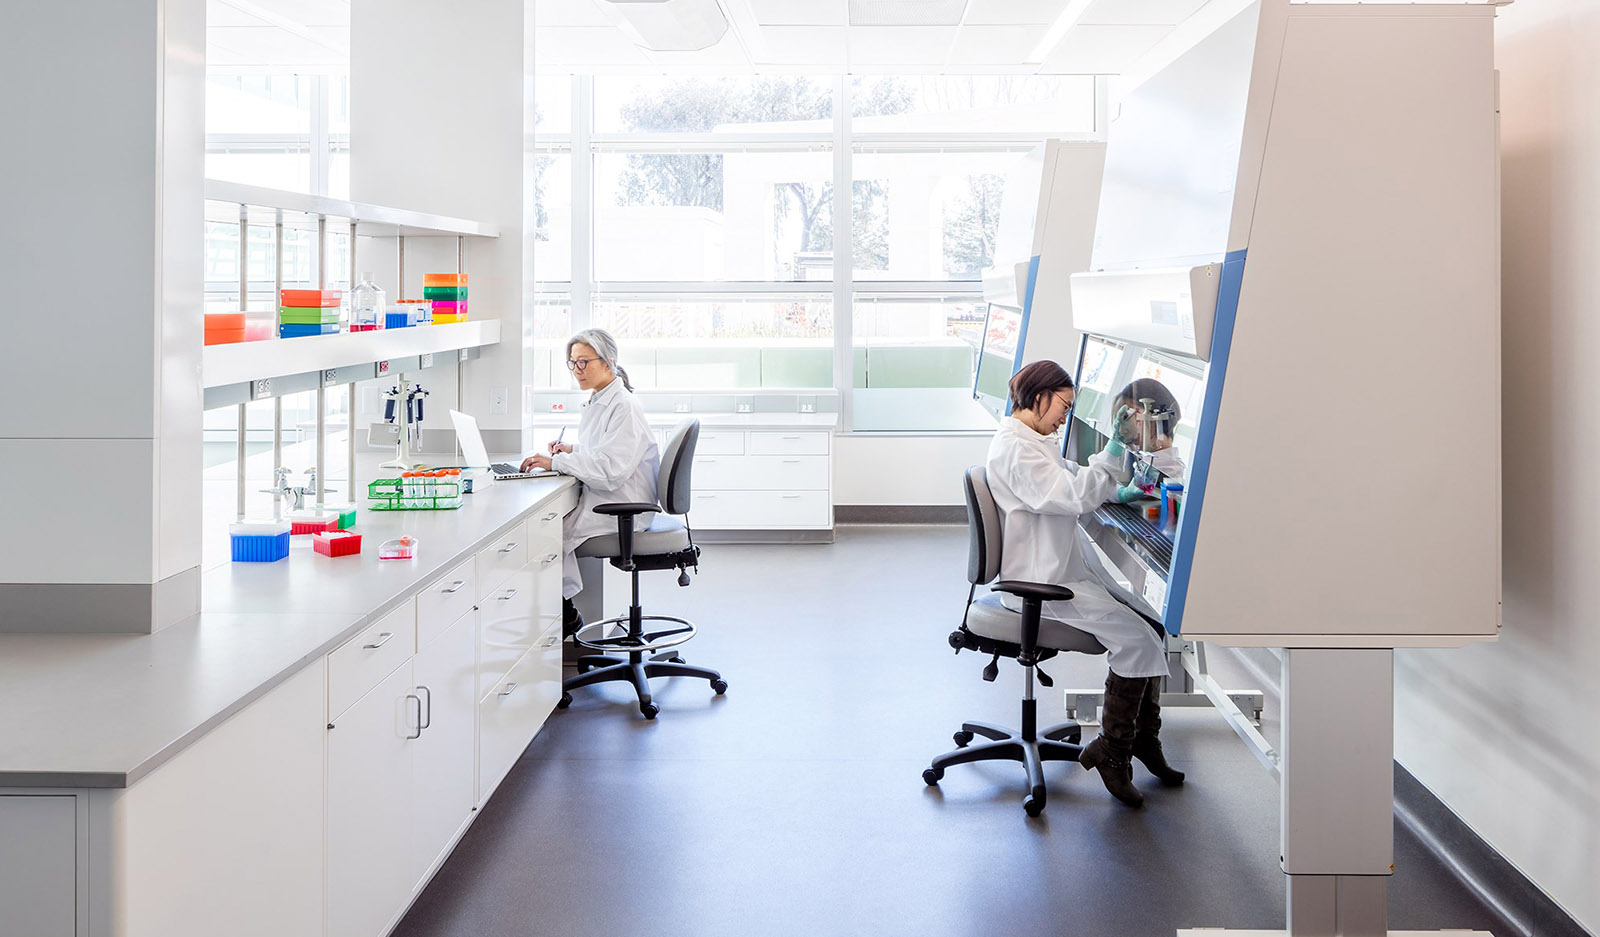 COVID-19 has accelerated the need for flexible labs and research environments